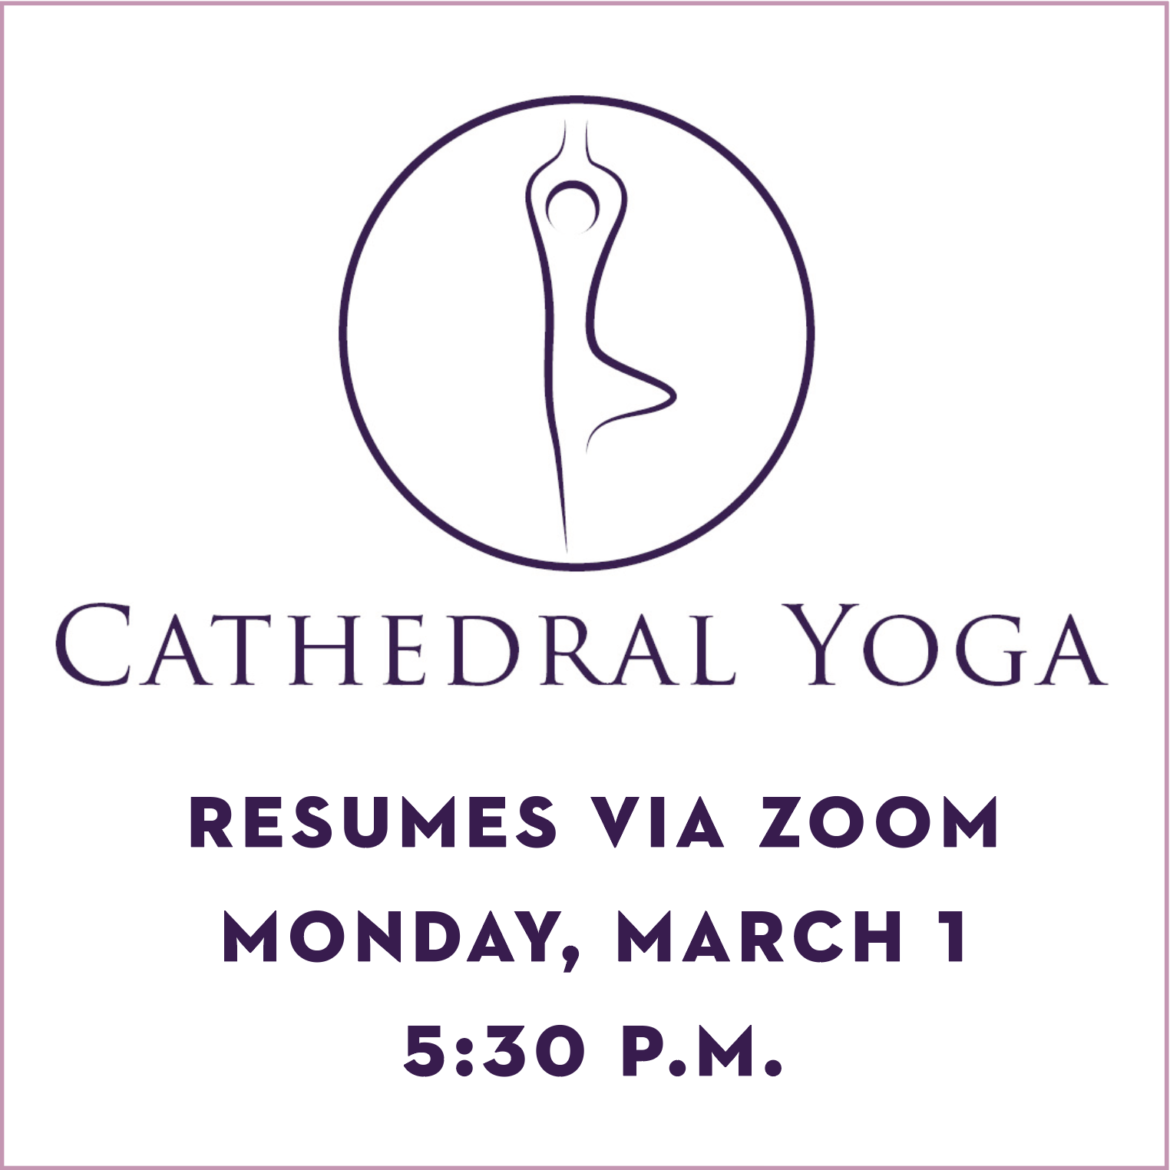 Cathedral Yoga Resumes Monday March 1!